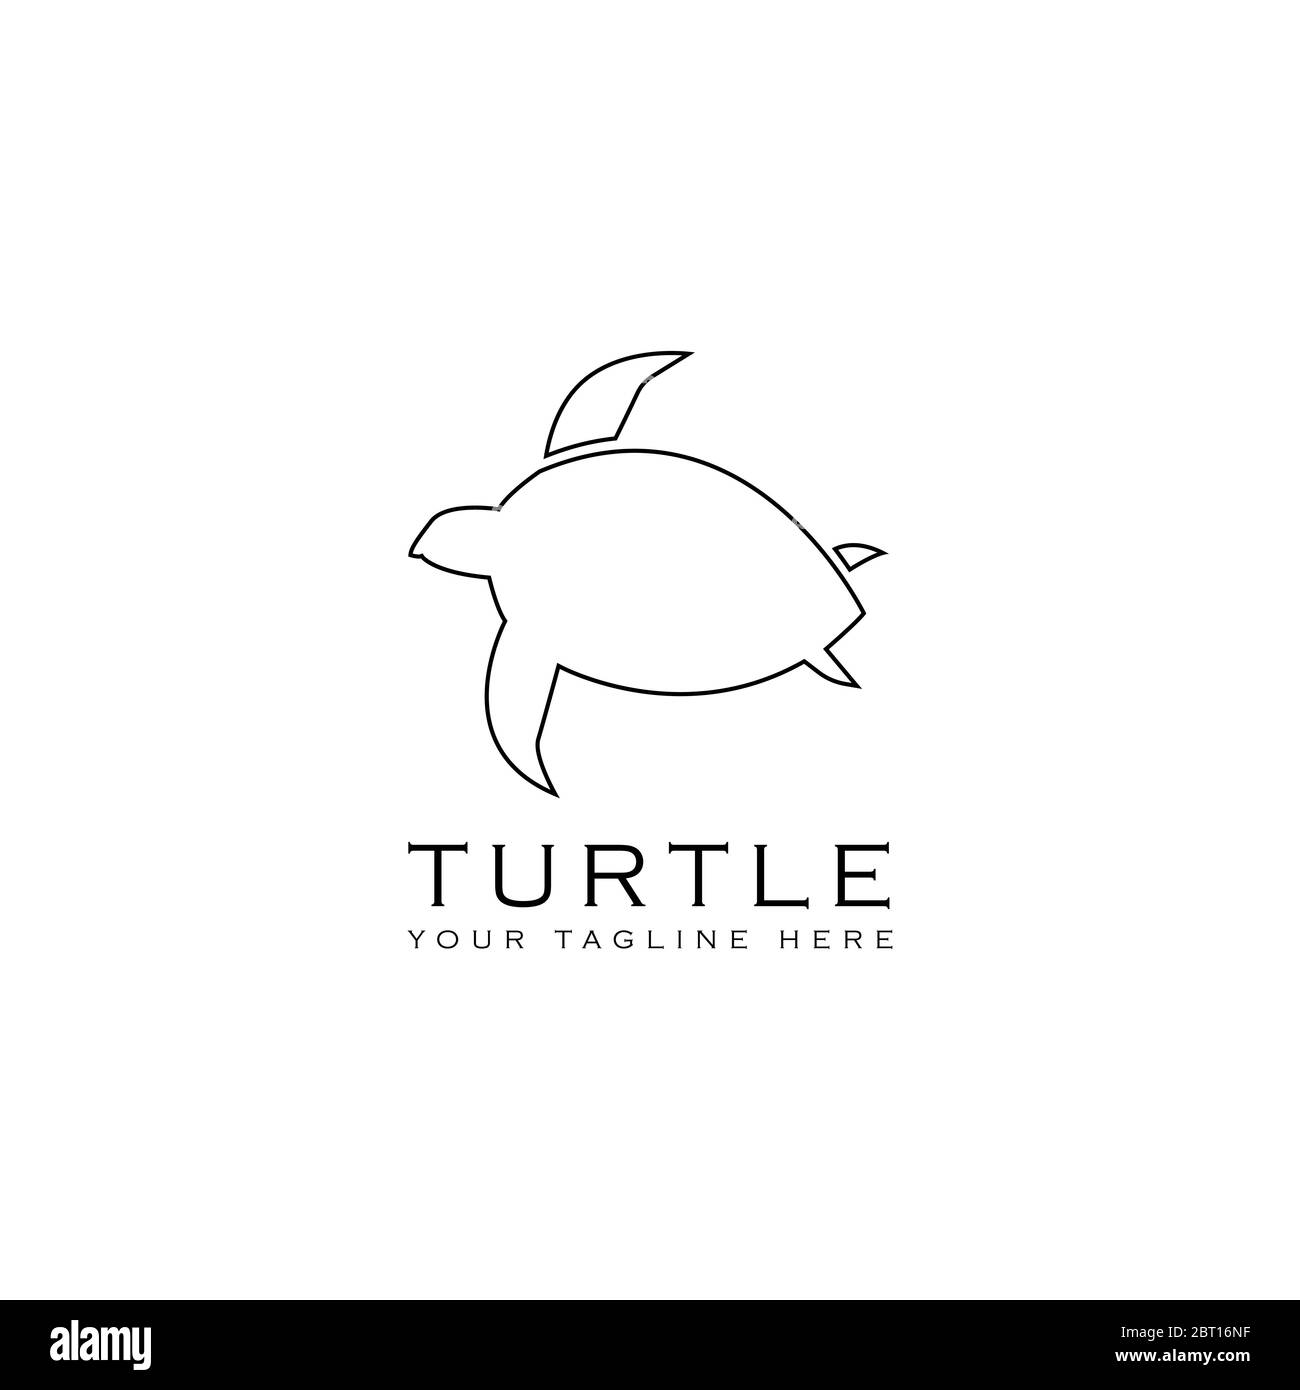 This logo shows a turtle. This logo is good for use as a company or business logo engaged in animal and marine observers. Stock Vector